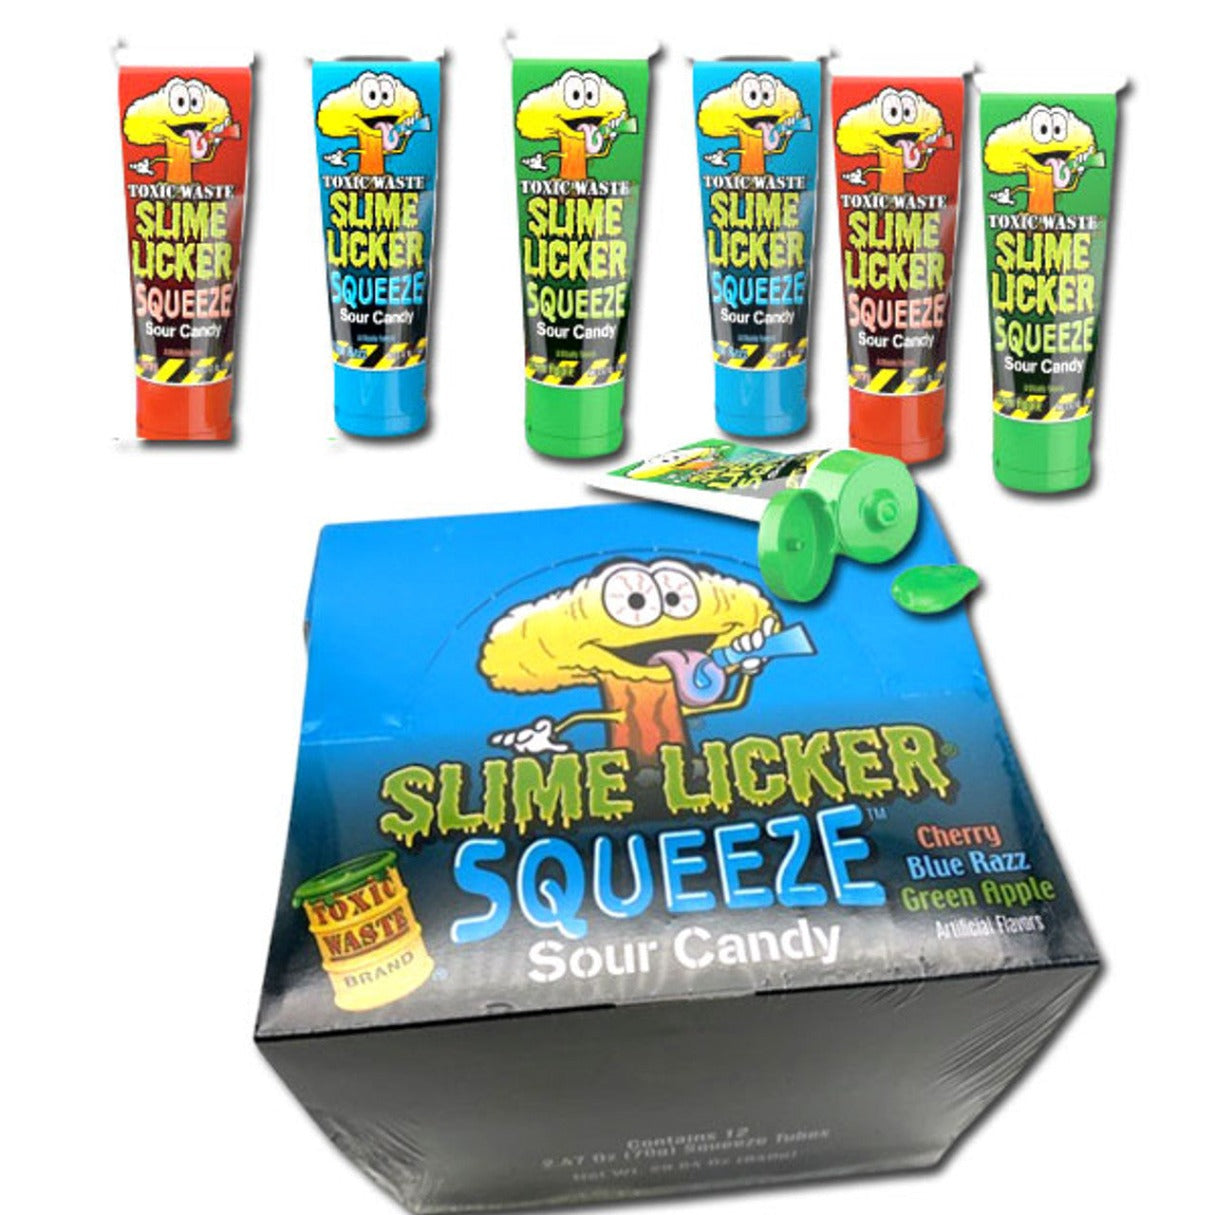 Toxic Waste Slime Licker Sour Squeeze - 2.47 oz